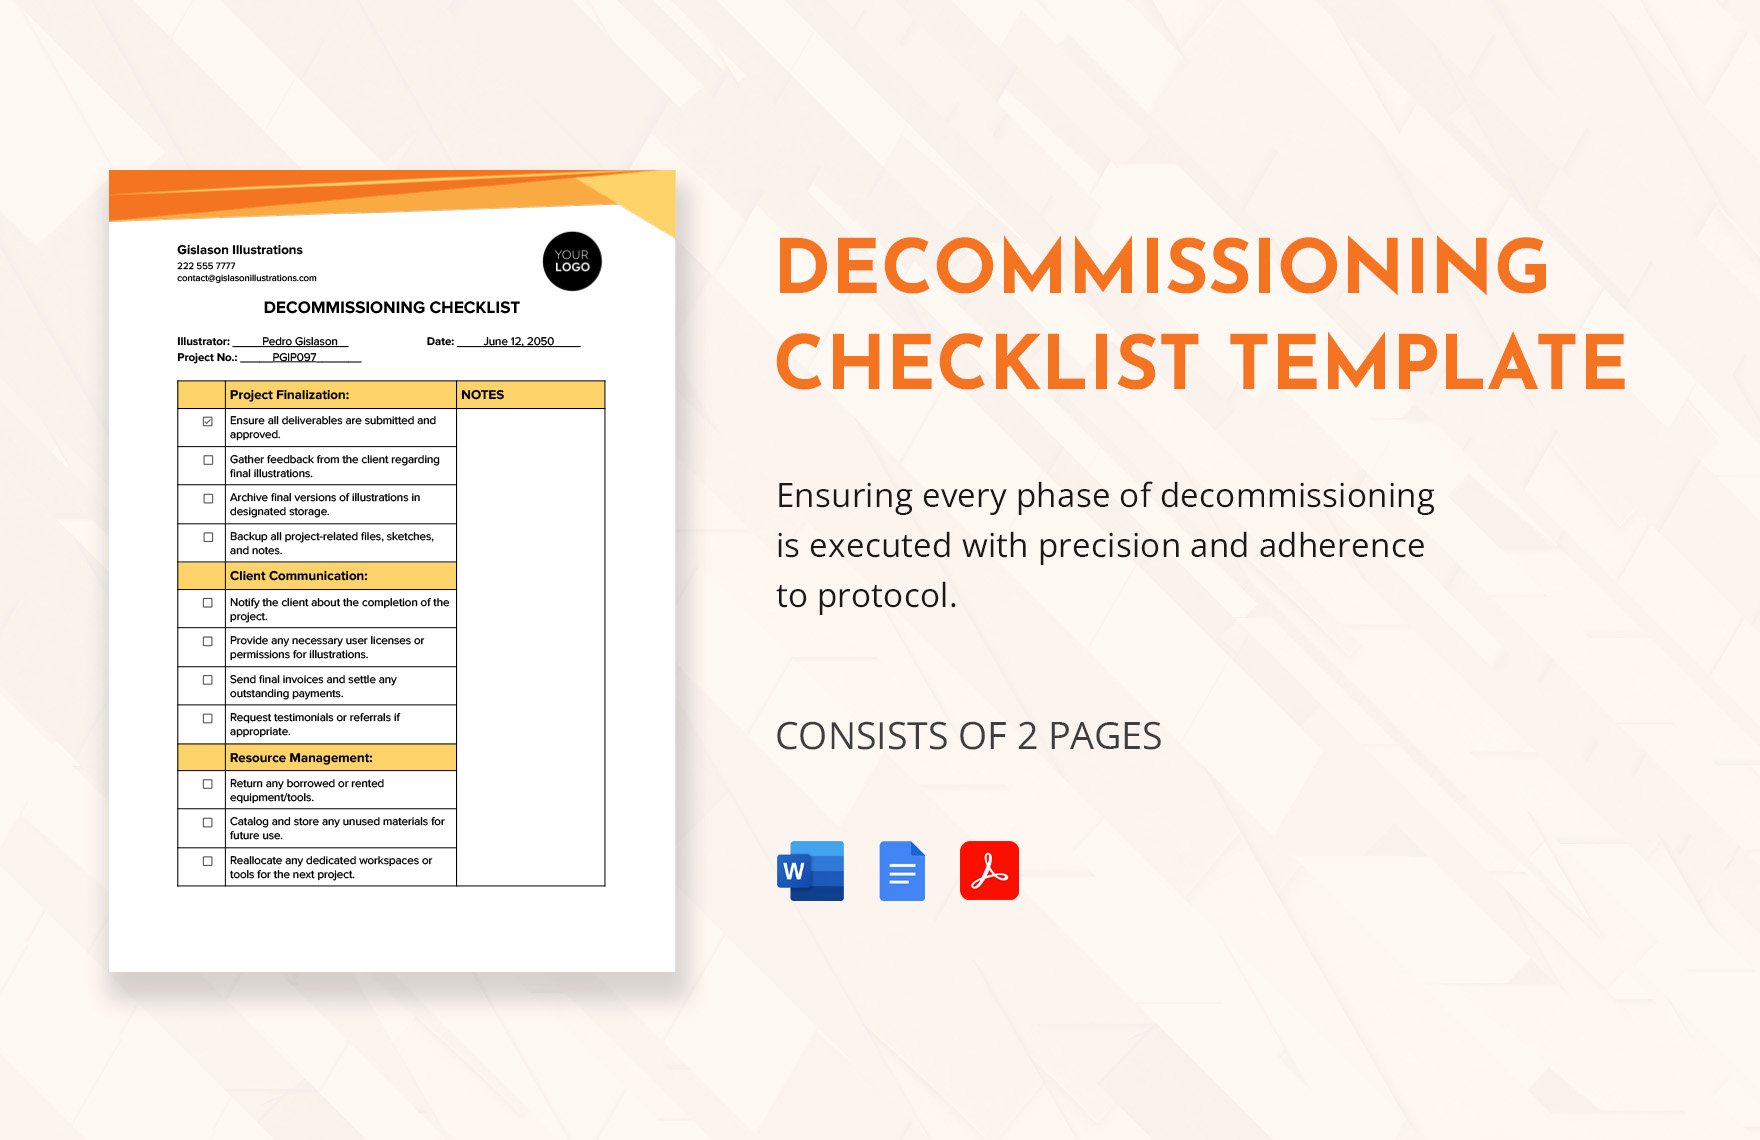 Decommissioning Checklist Template